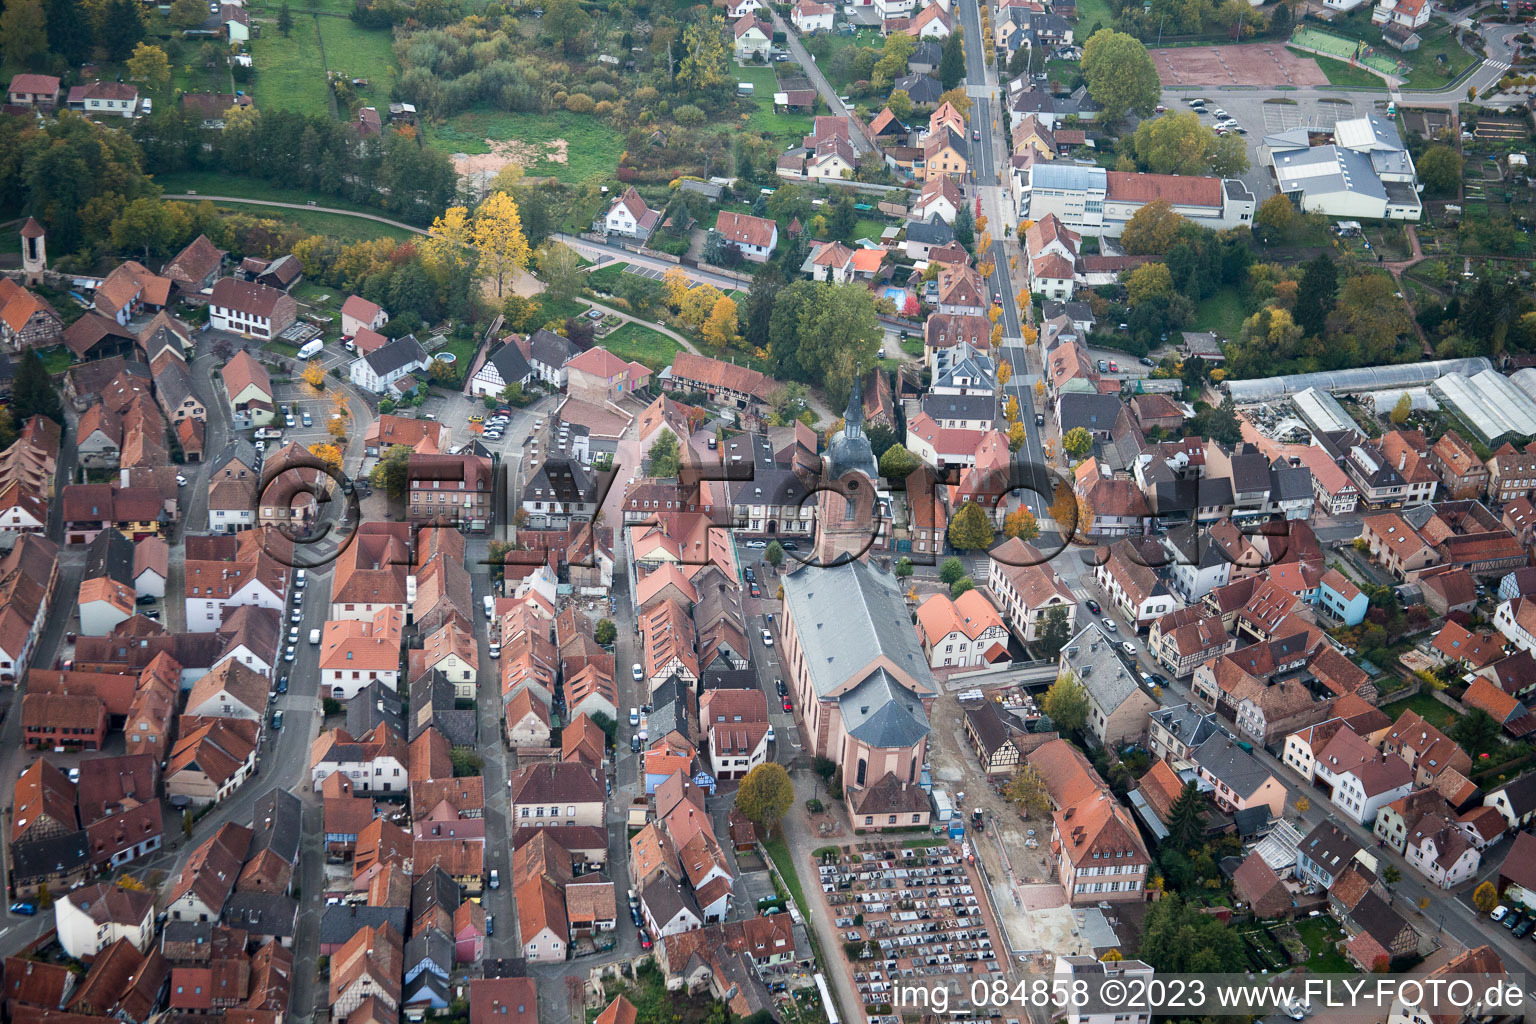 Reichshoffen in the state Bas-Rhin, France seen from above